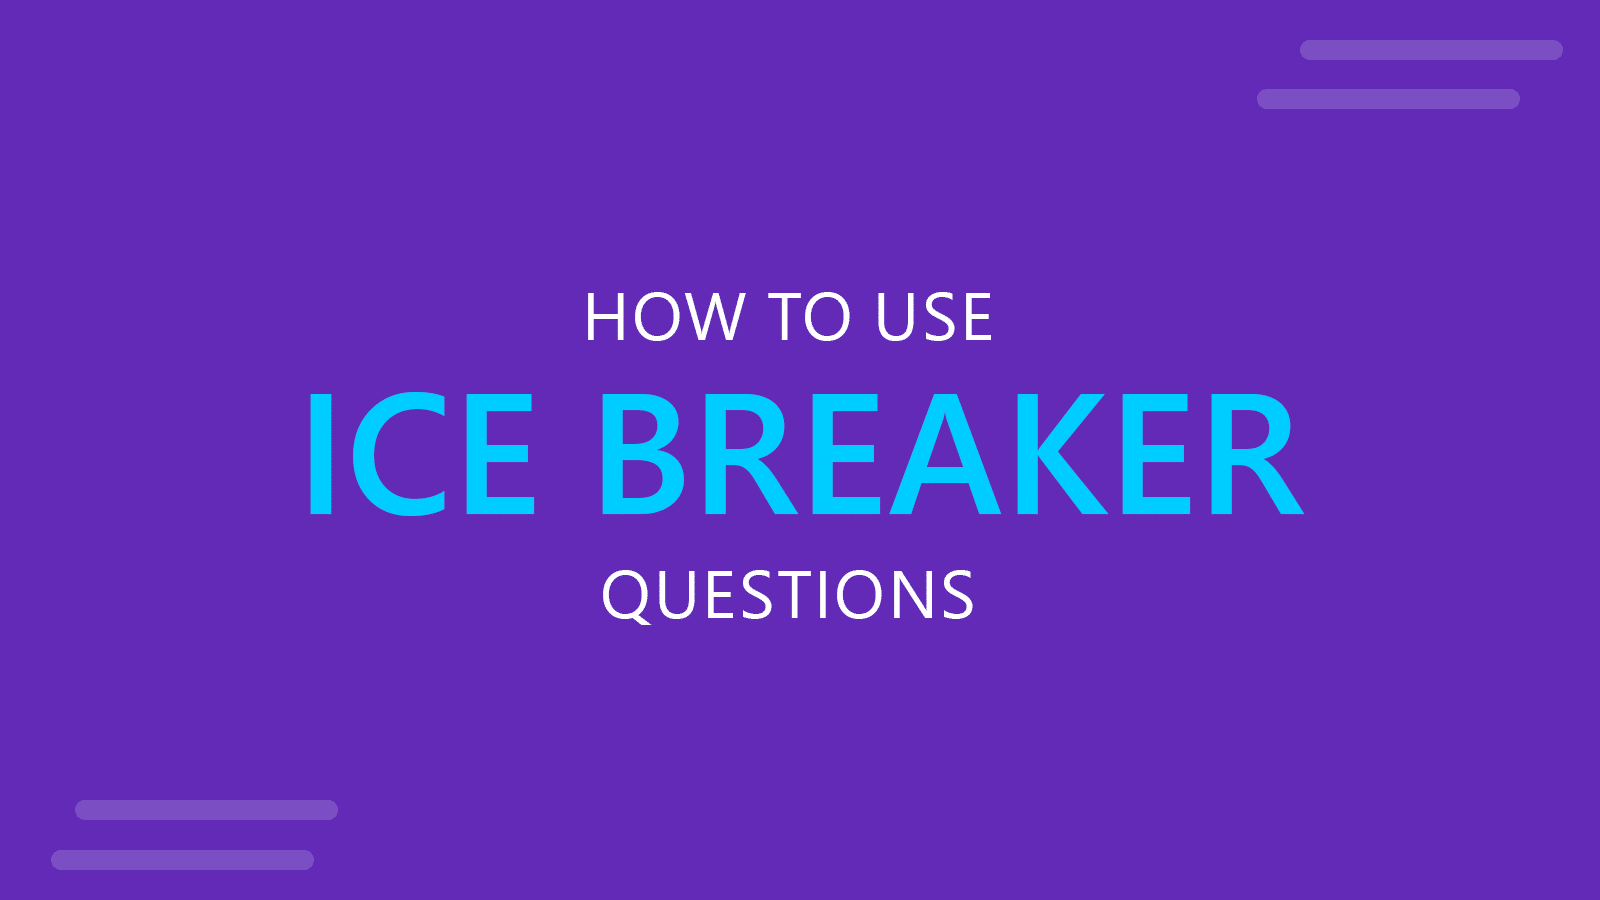 How to Use Ice Breaker Questions to Engage Audience